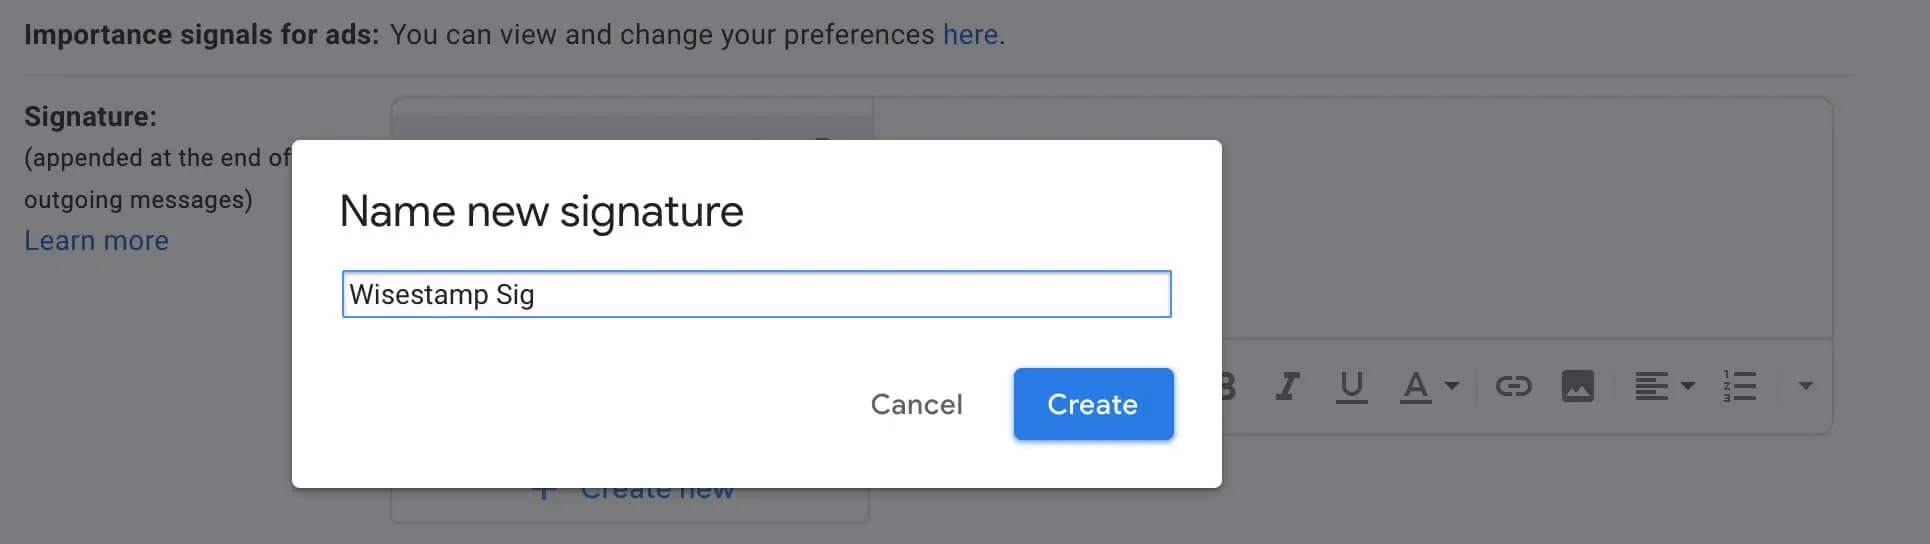 Add email signature in Gmail - Step 3 - Name your Gmail signature